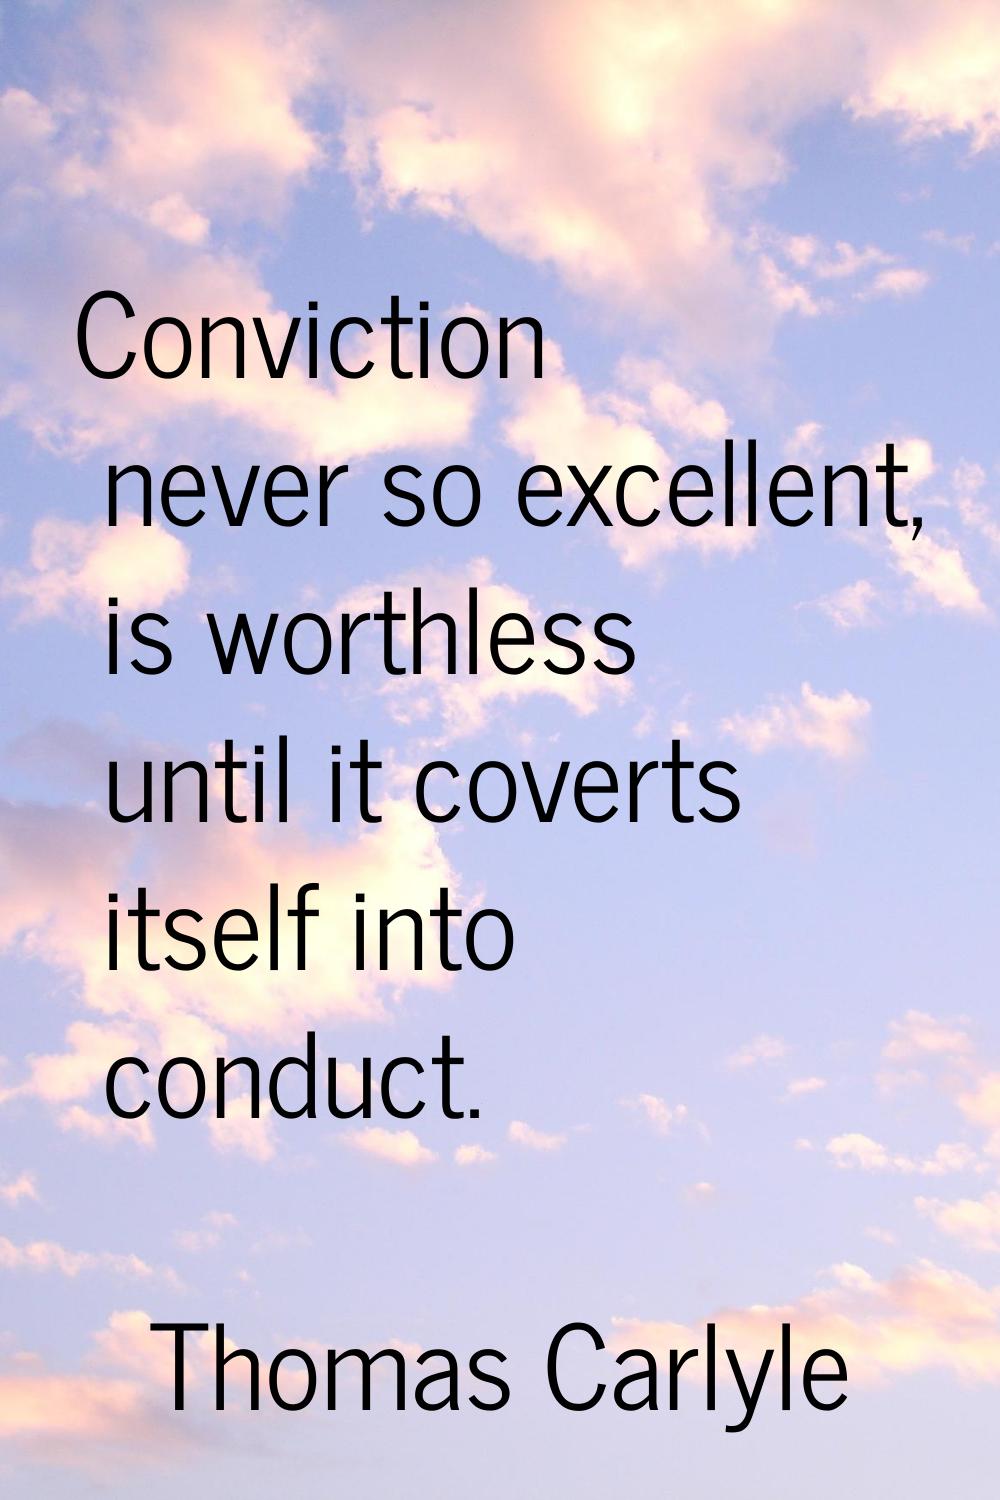 Conviction never so excellent, is worthless until it coverts itself into conduct.